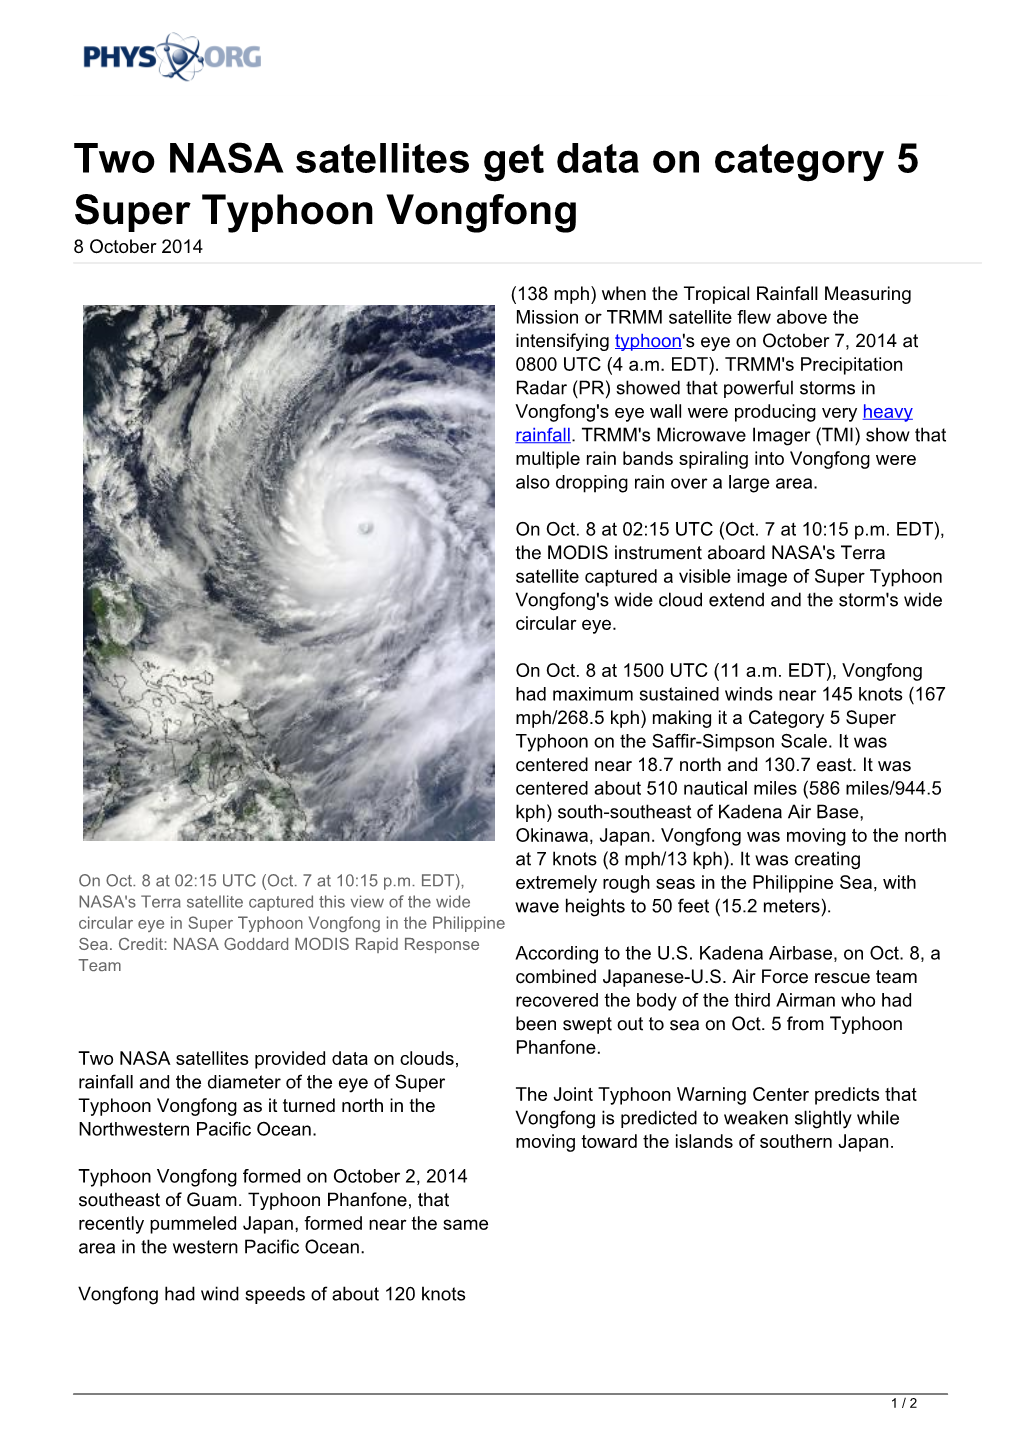 Two NASA Satellites Get Data on Category 5 Super Typhoon Vongfong 8 October 2014